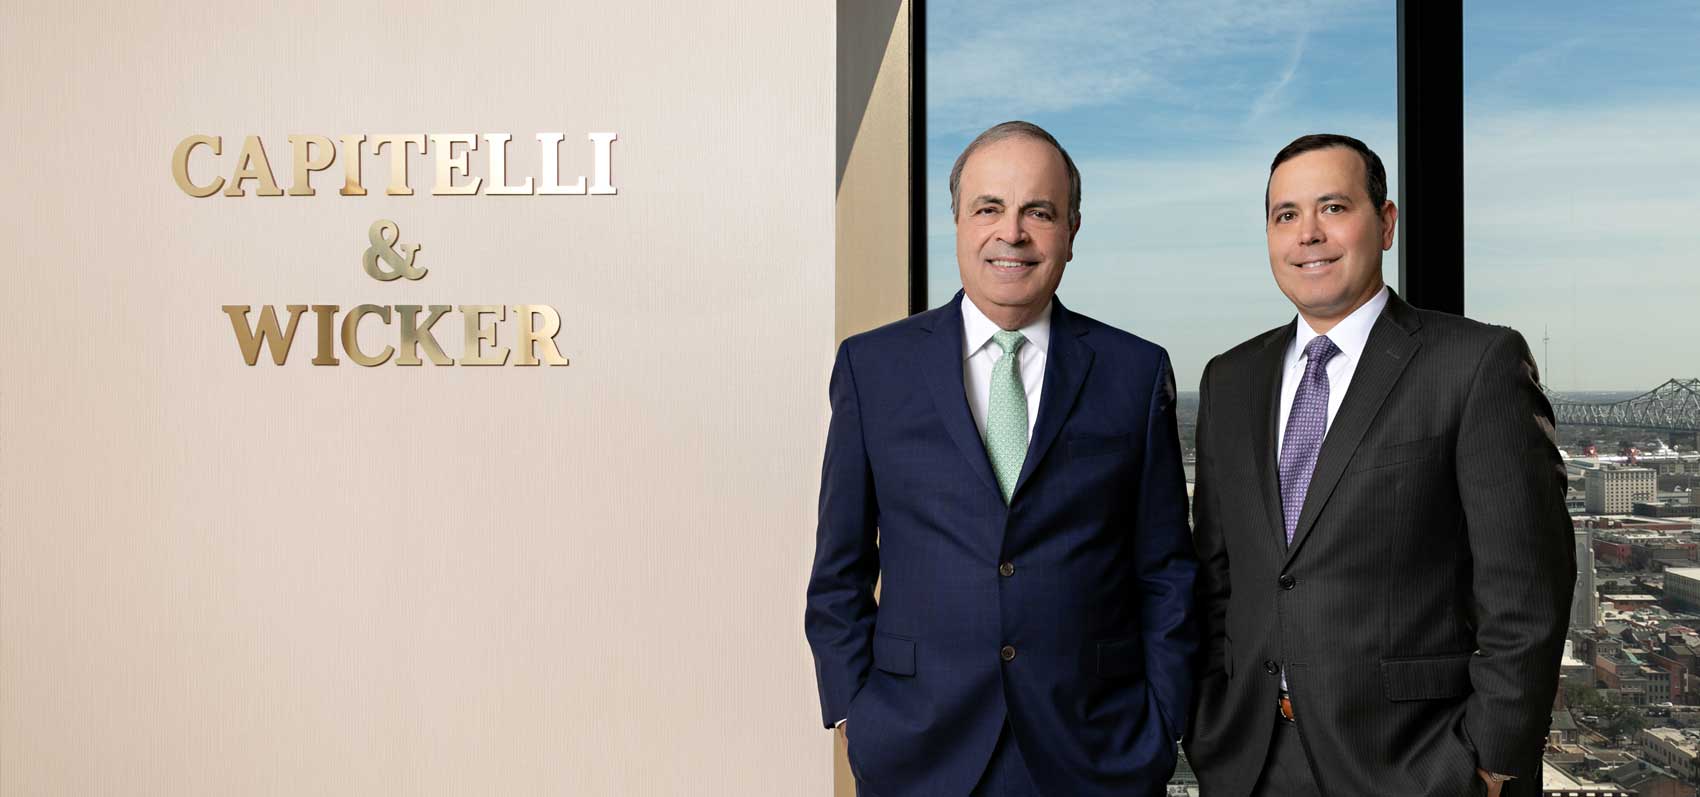 Capitelli & Wicker - New Orleans Law Firm - white collar and medical malpractice cases